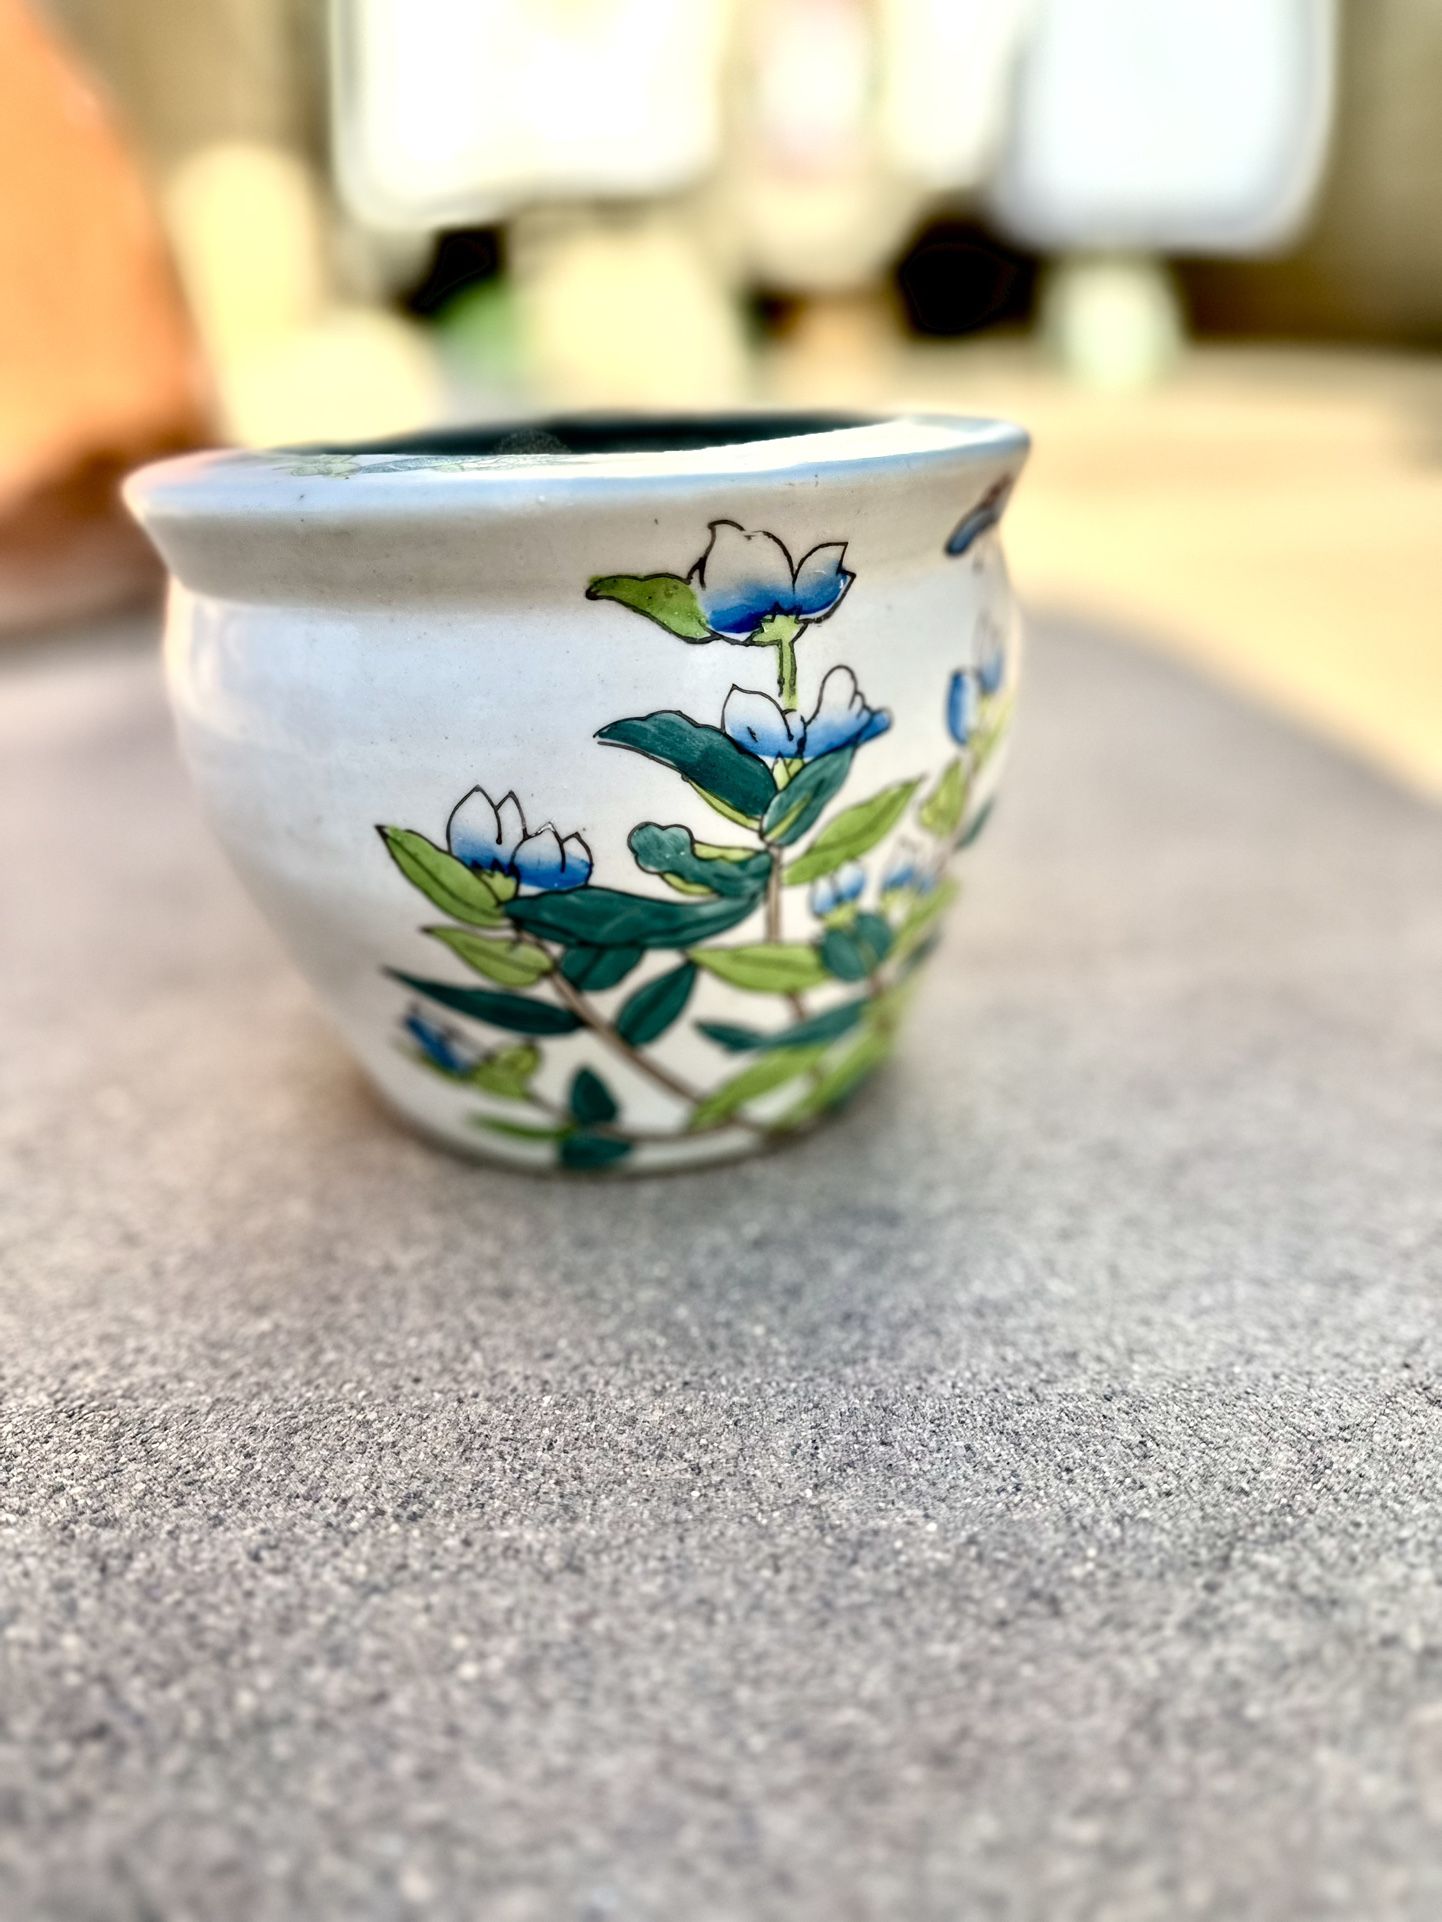 Ceramic Pottery With Flower Design Painting 